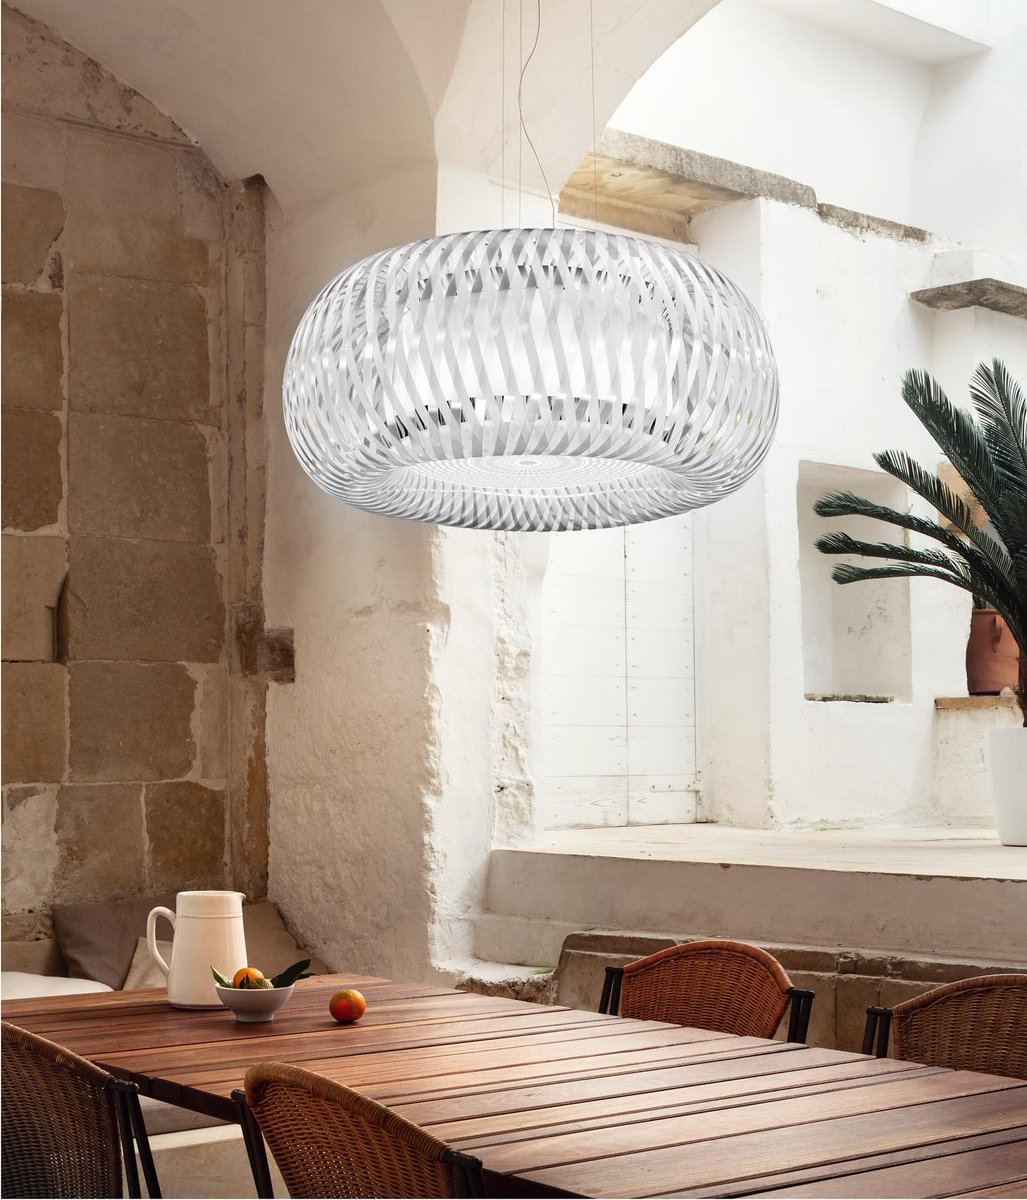 Discover eco-luxury lighting from Italy with us! Their stunning designs respect the environment and support bees 🐝. Exclusive fixtures coming soon. Call us at (203) 516-8494! #EcoFriendly #LuxuryLighting #Bees #InteriorDesign 🛋️💡